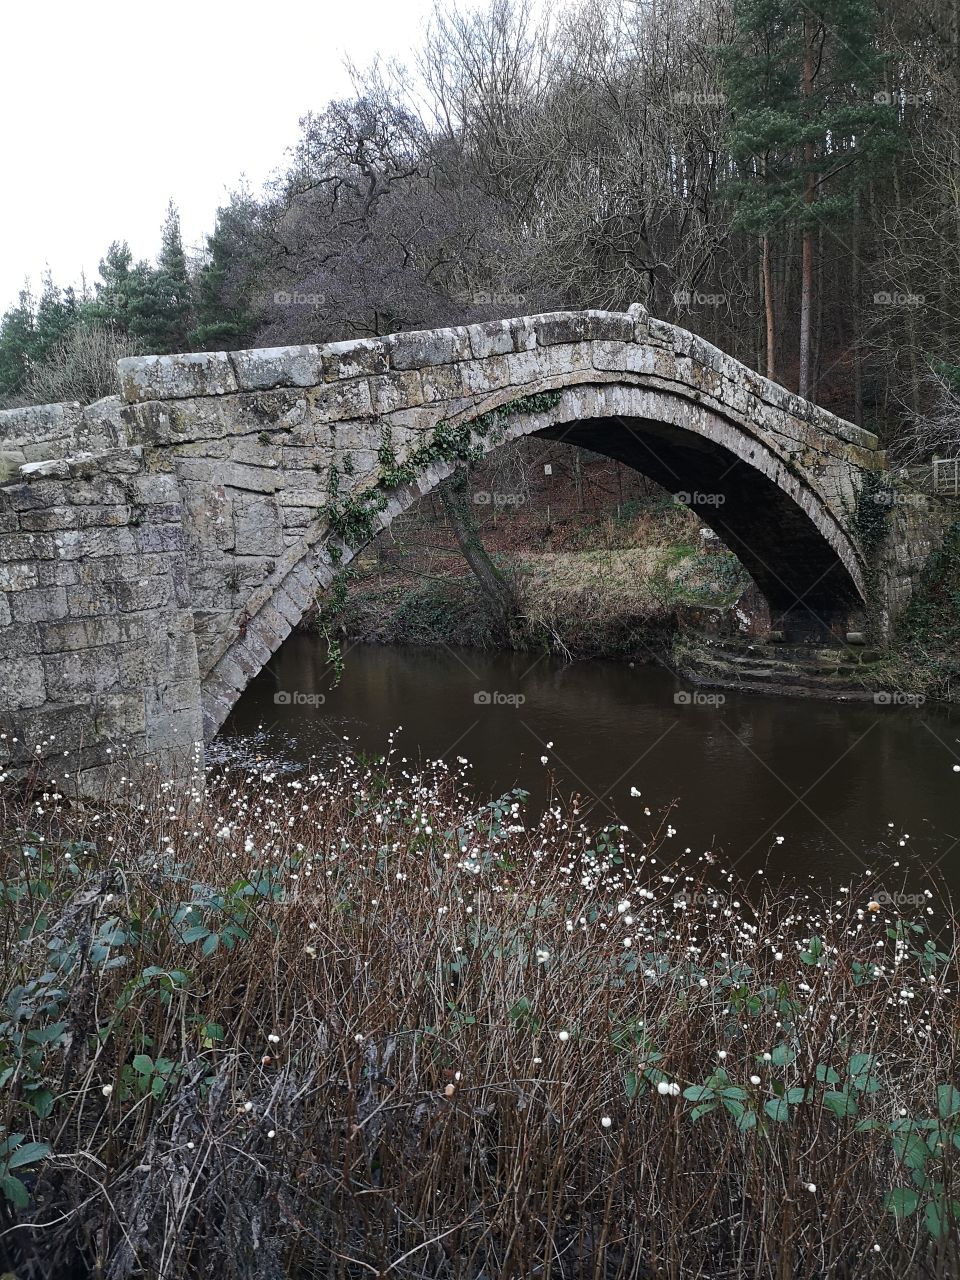 Stone Bridge over a river with foliage in the foreground